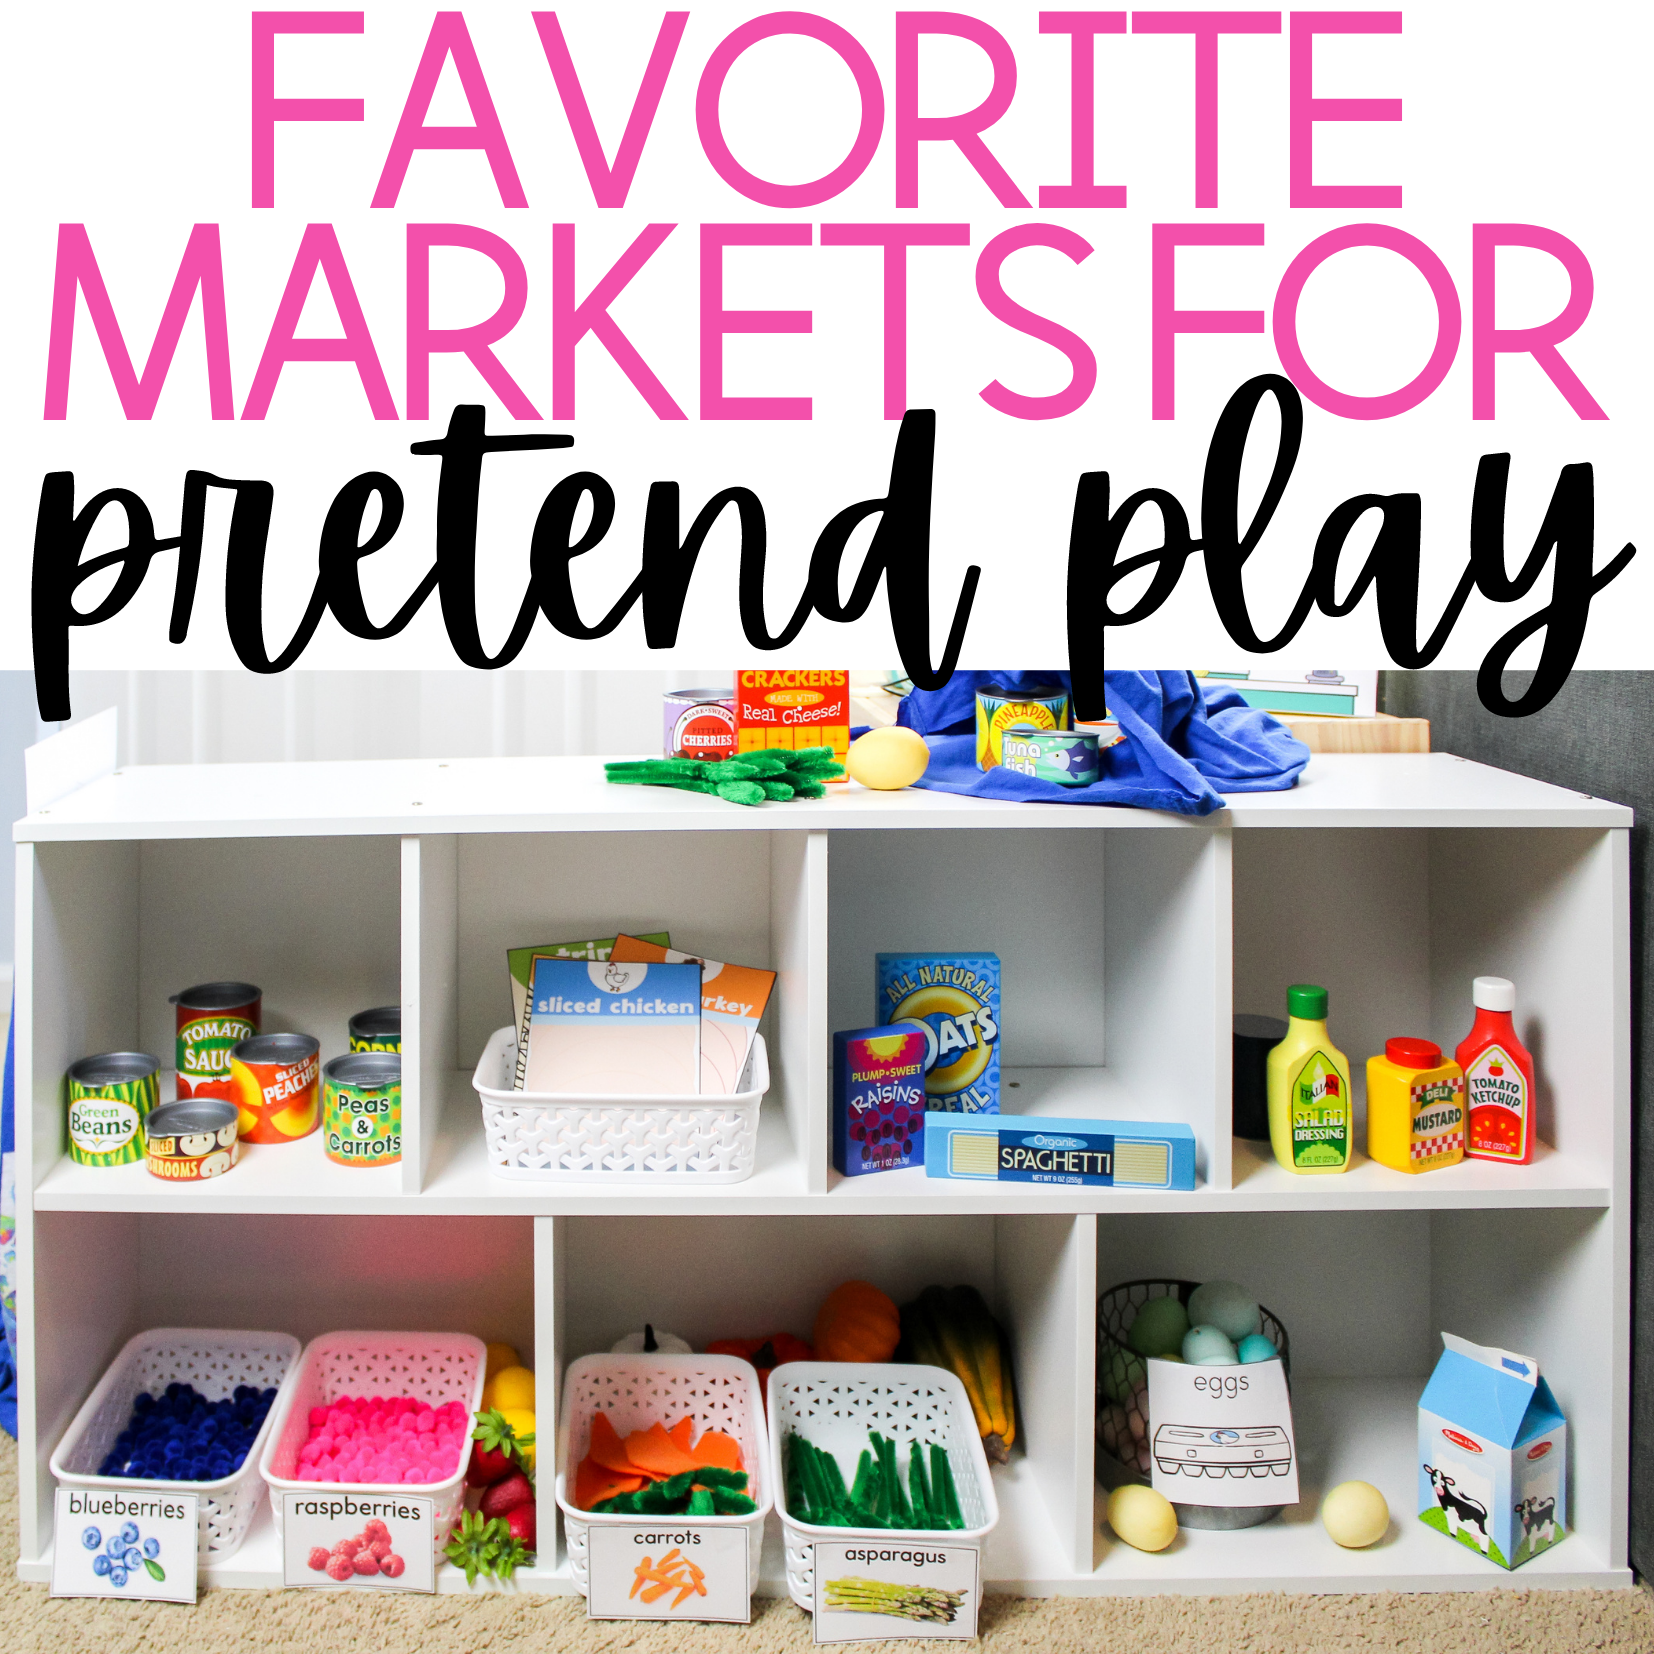 Favorite Markets for Pretend Play